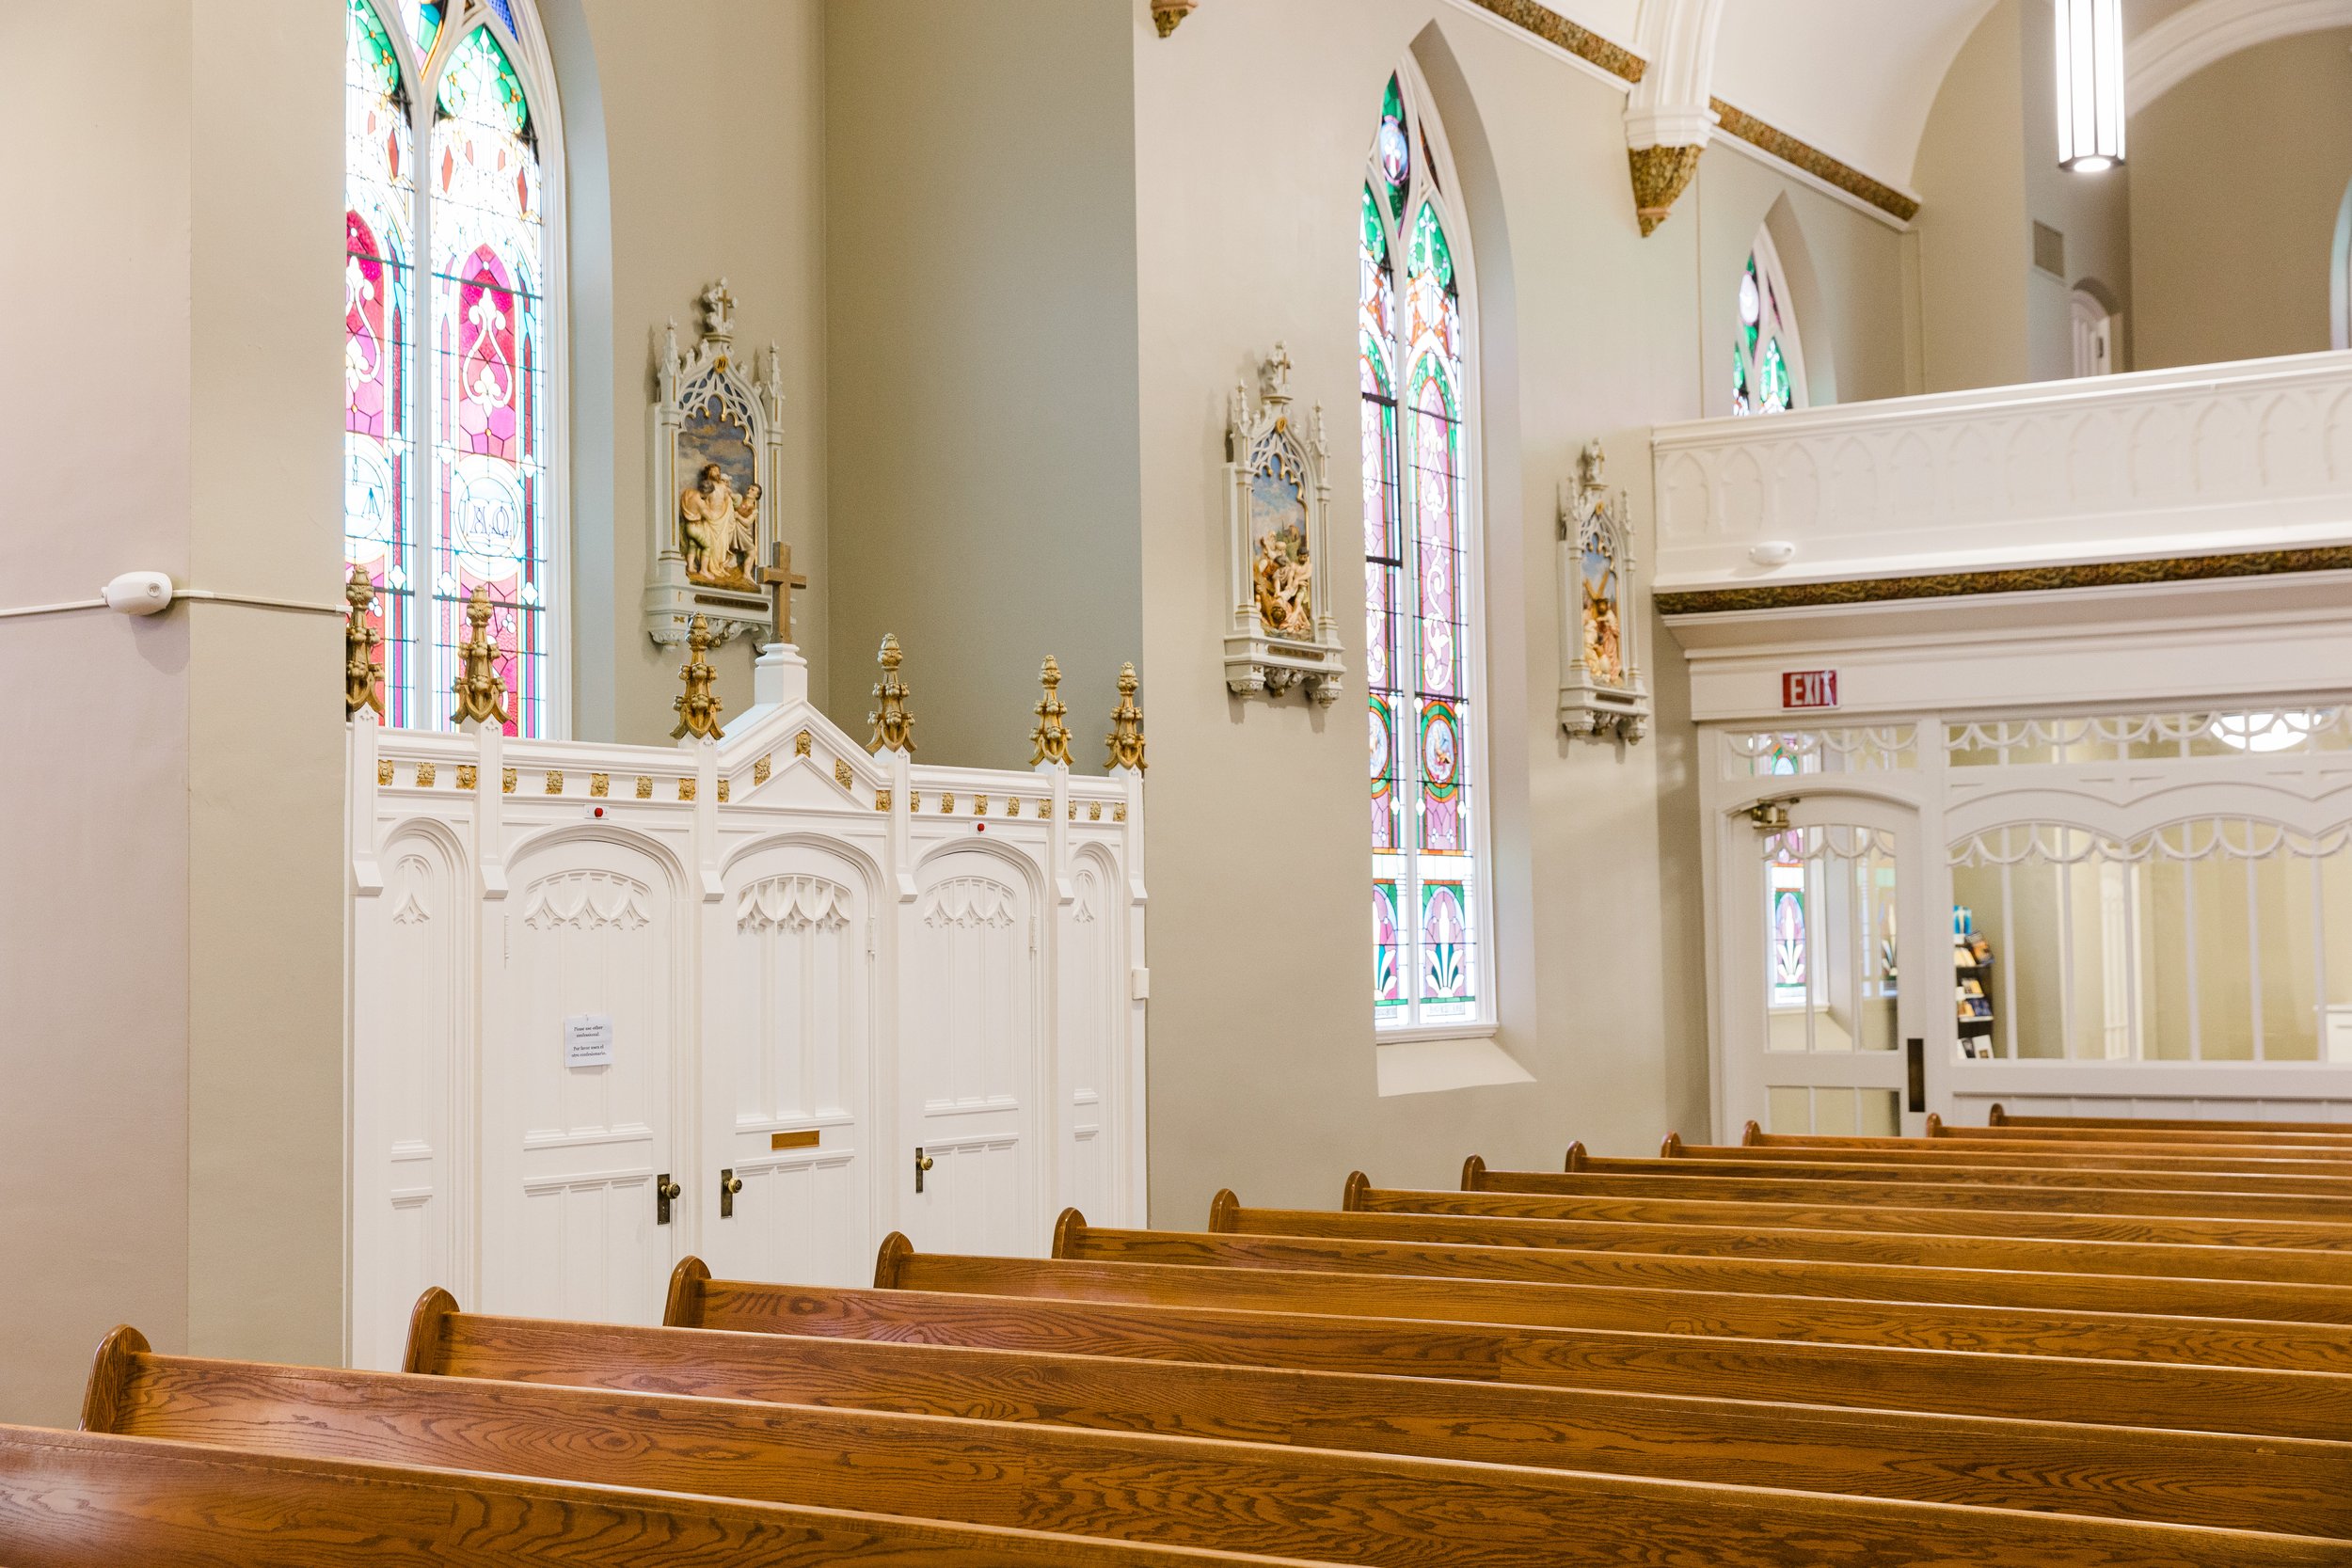 Pews and confessional from the center